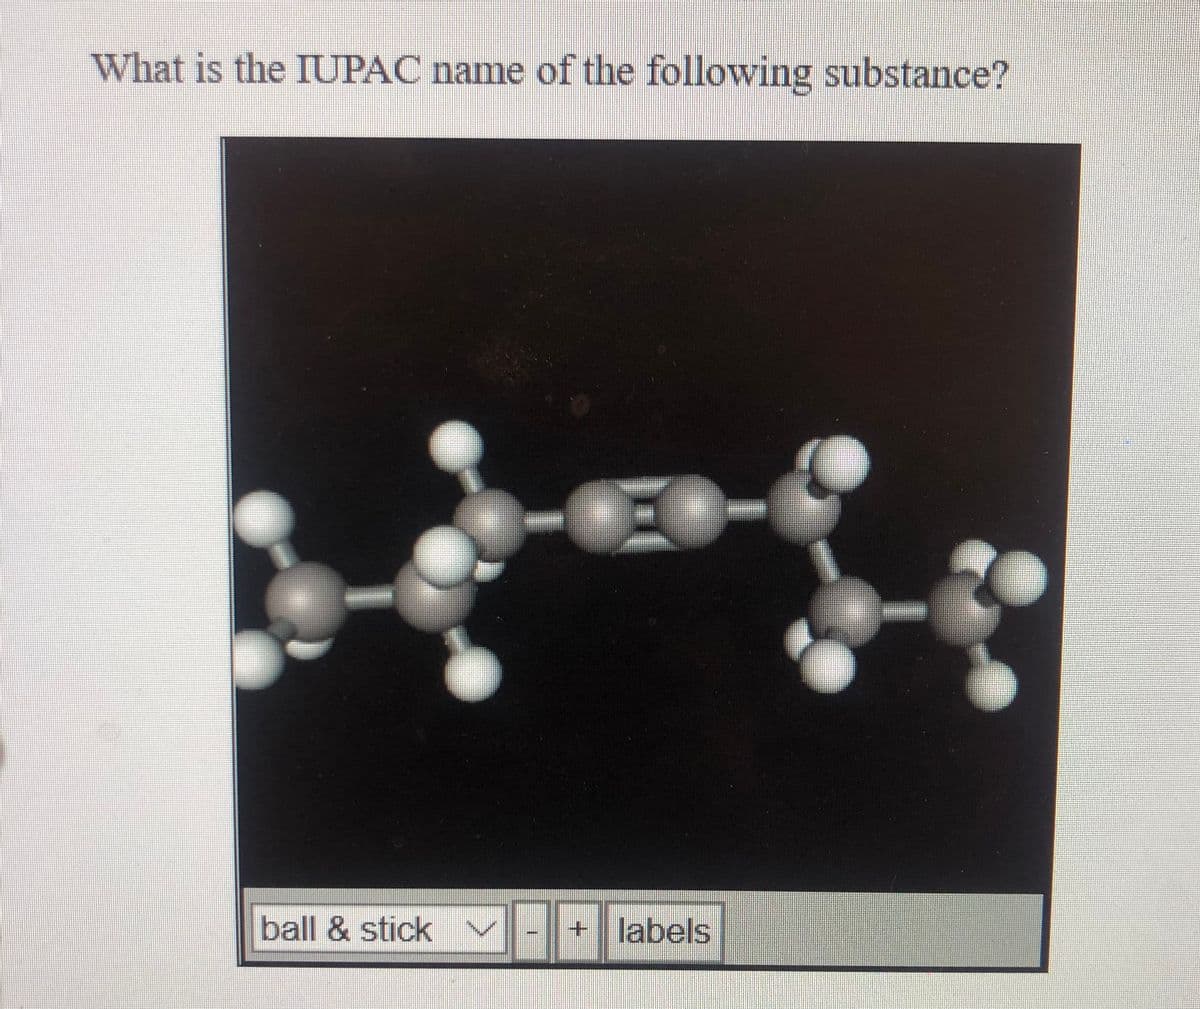 What is the IUPAC name of the following substance?
EO-
ball & stick v -- labels
